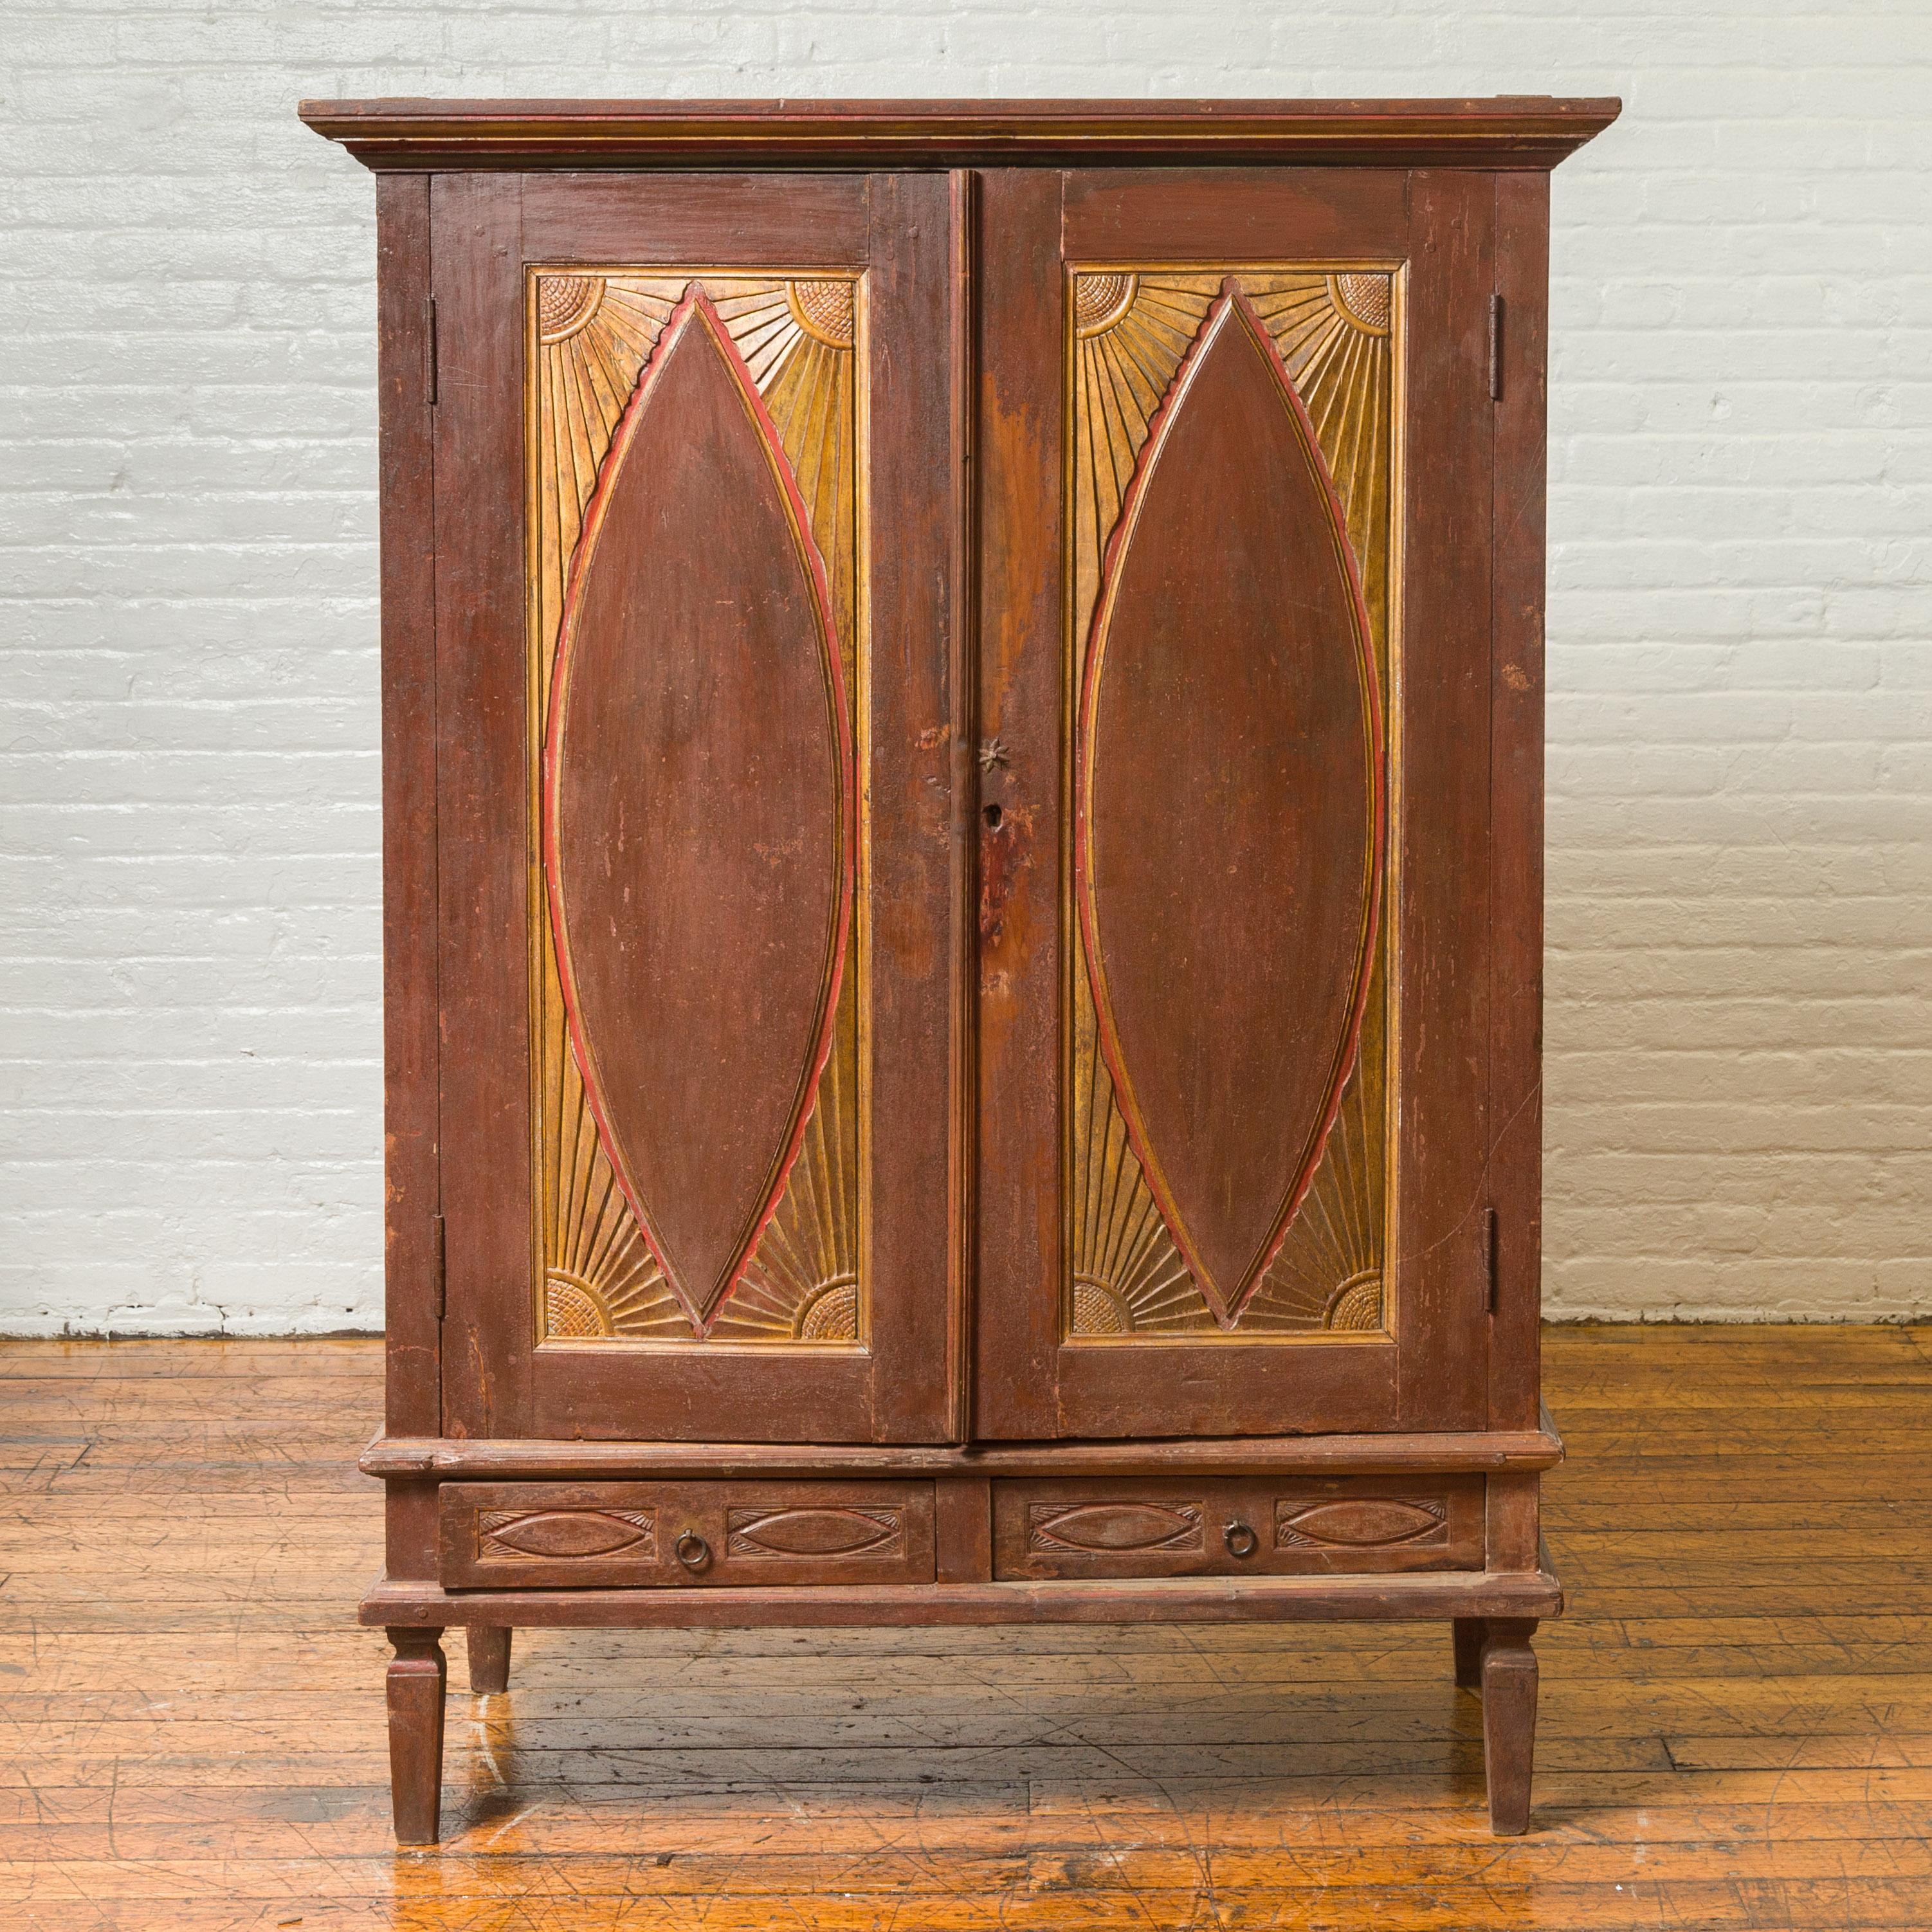 An antique Indonesian wooden cabinet from the 19th century, with carved doors and radiating motifs. Crafted in Indonesia, this wooden cabinet attracts our attention with it elongated almond-style motifs, surrounded by sun rays in the corners and its